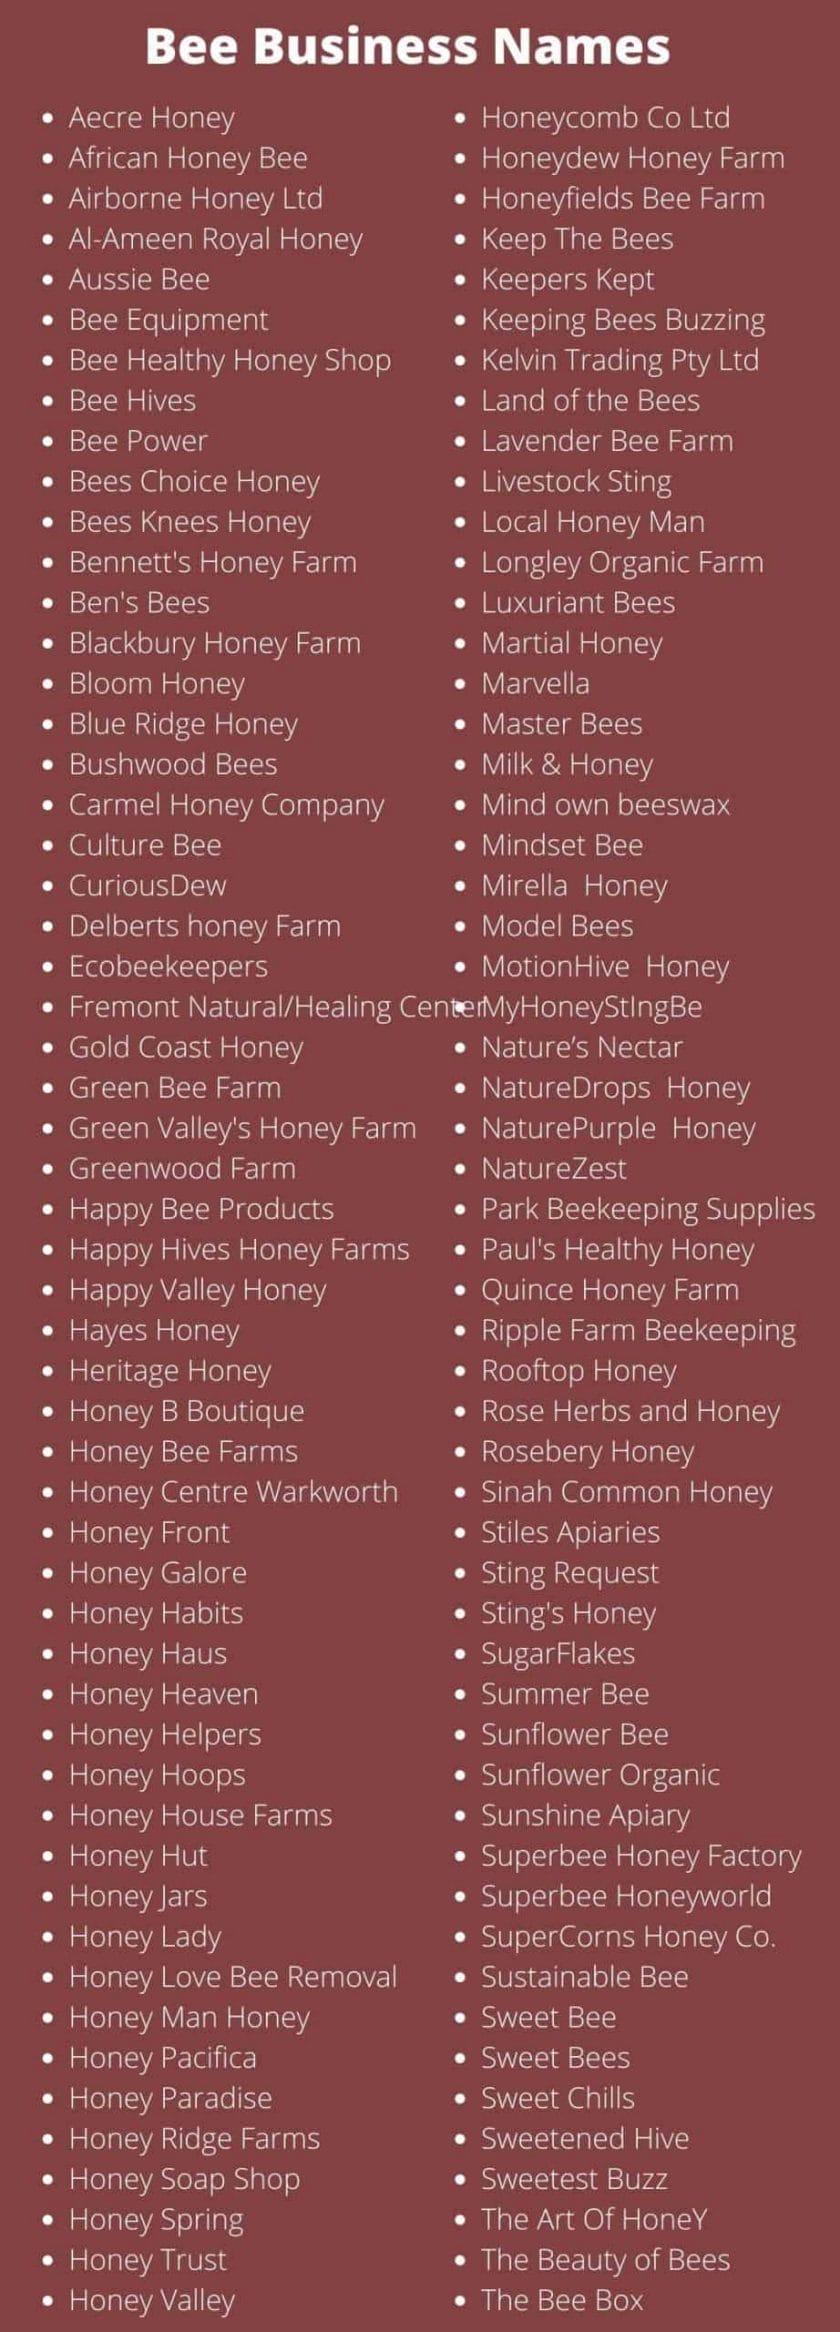 Bee Names: 200 Best Bee Business Name Ideas